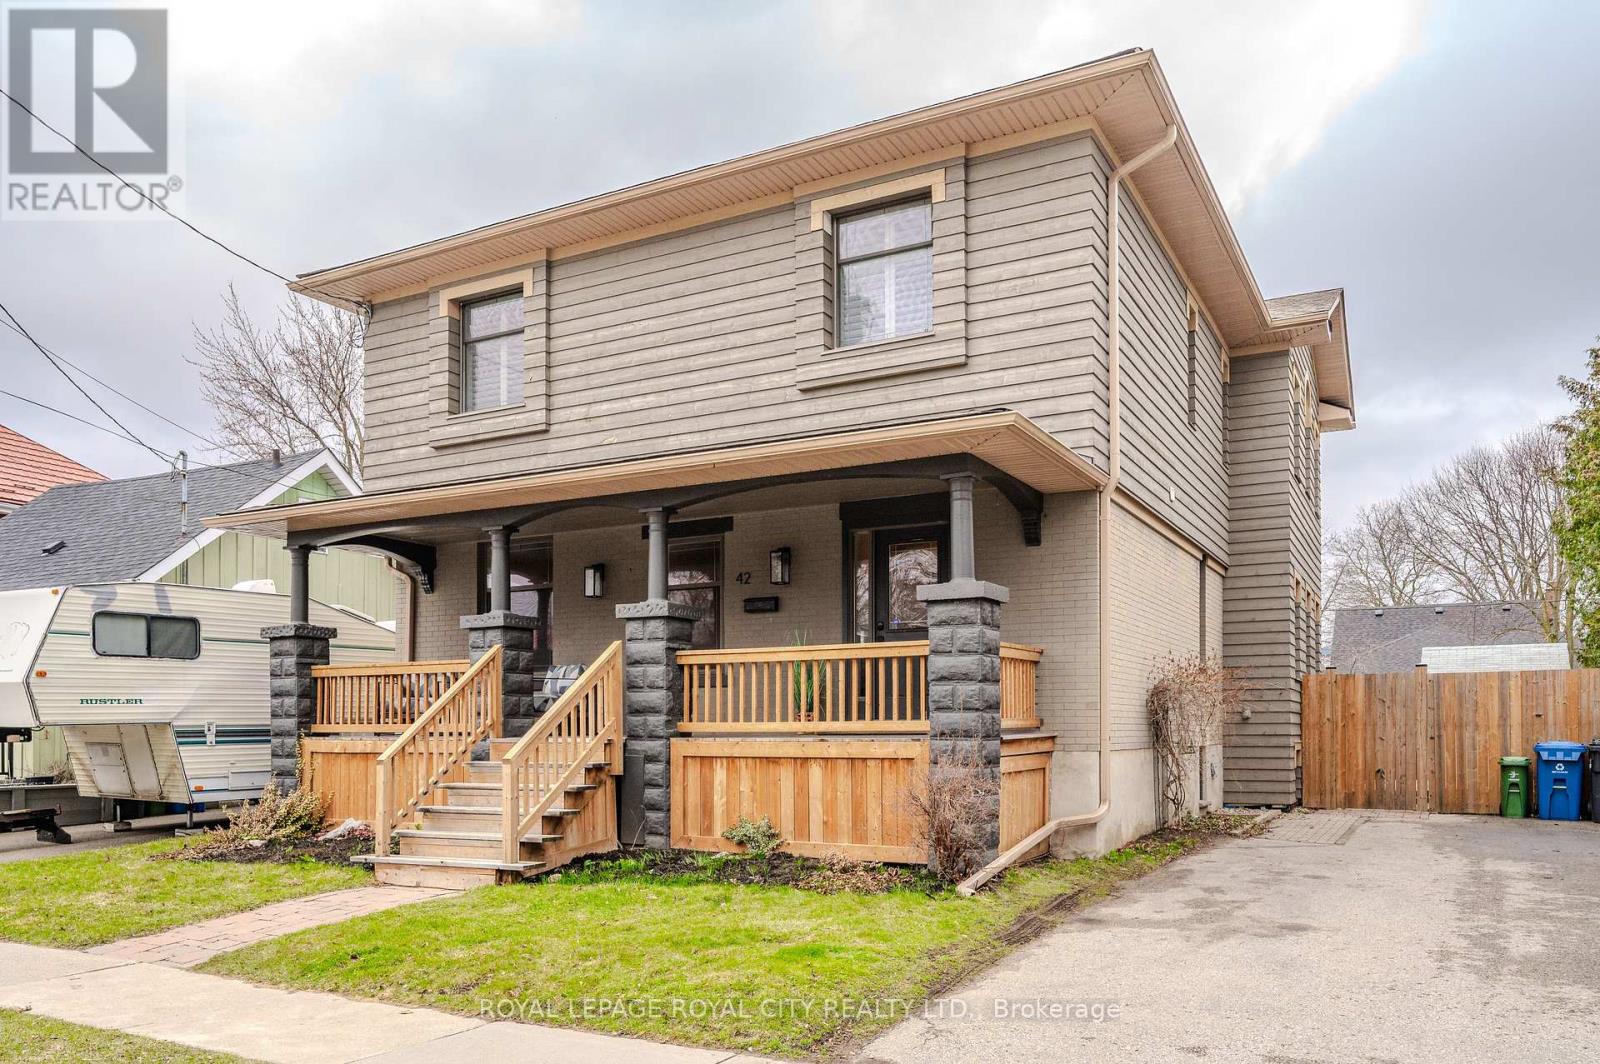 42 ALMA ST S located in Guelph, Ontario